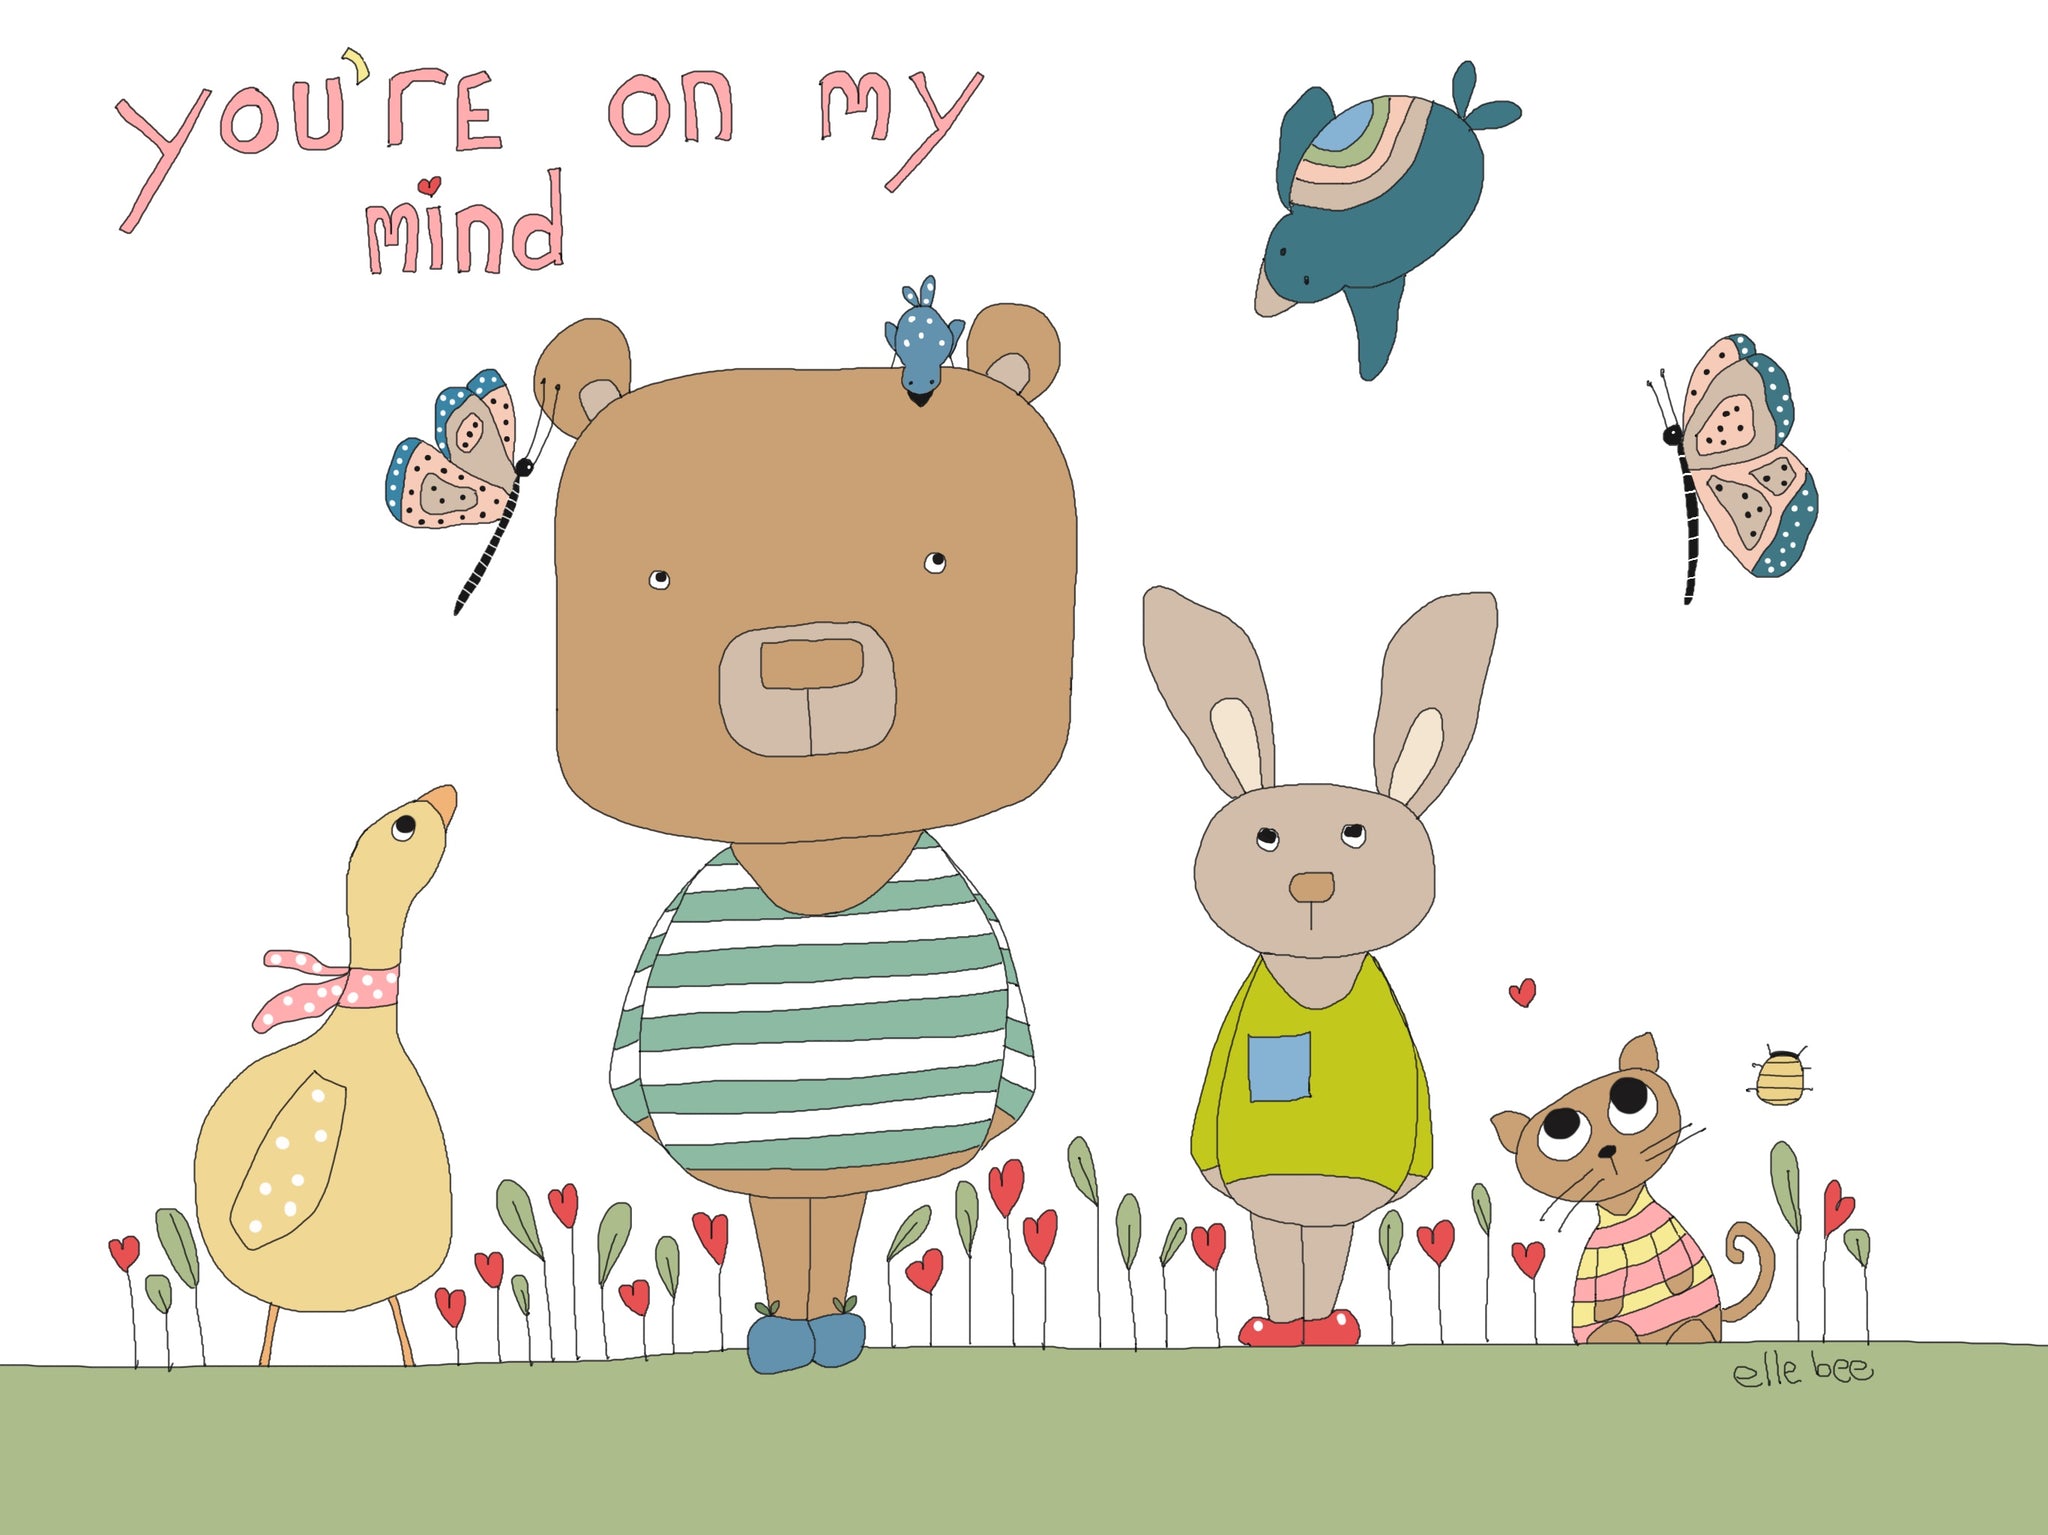 Greeting card “You’re on my mind”